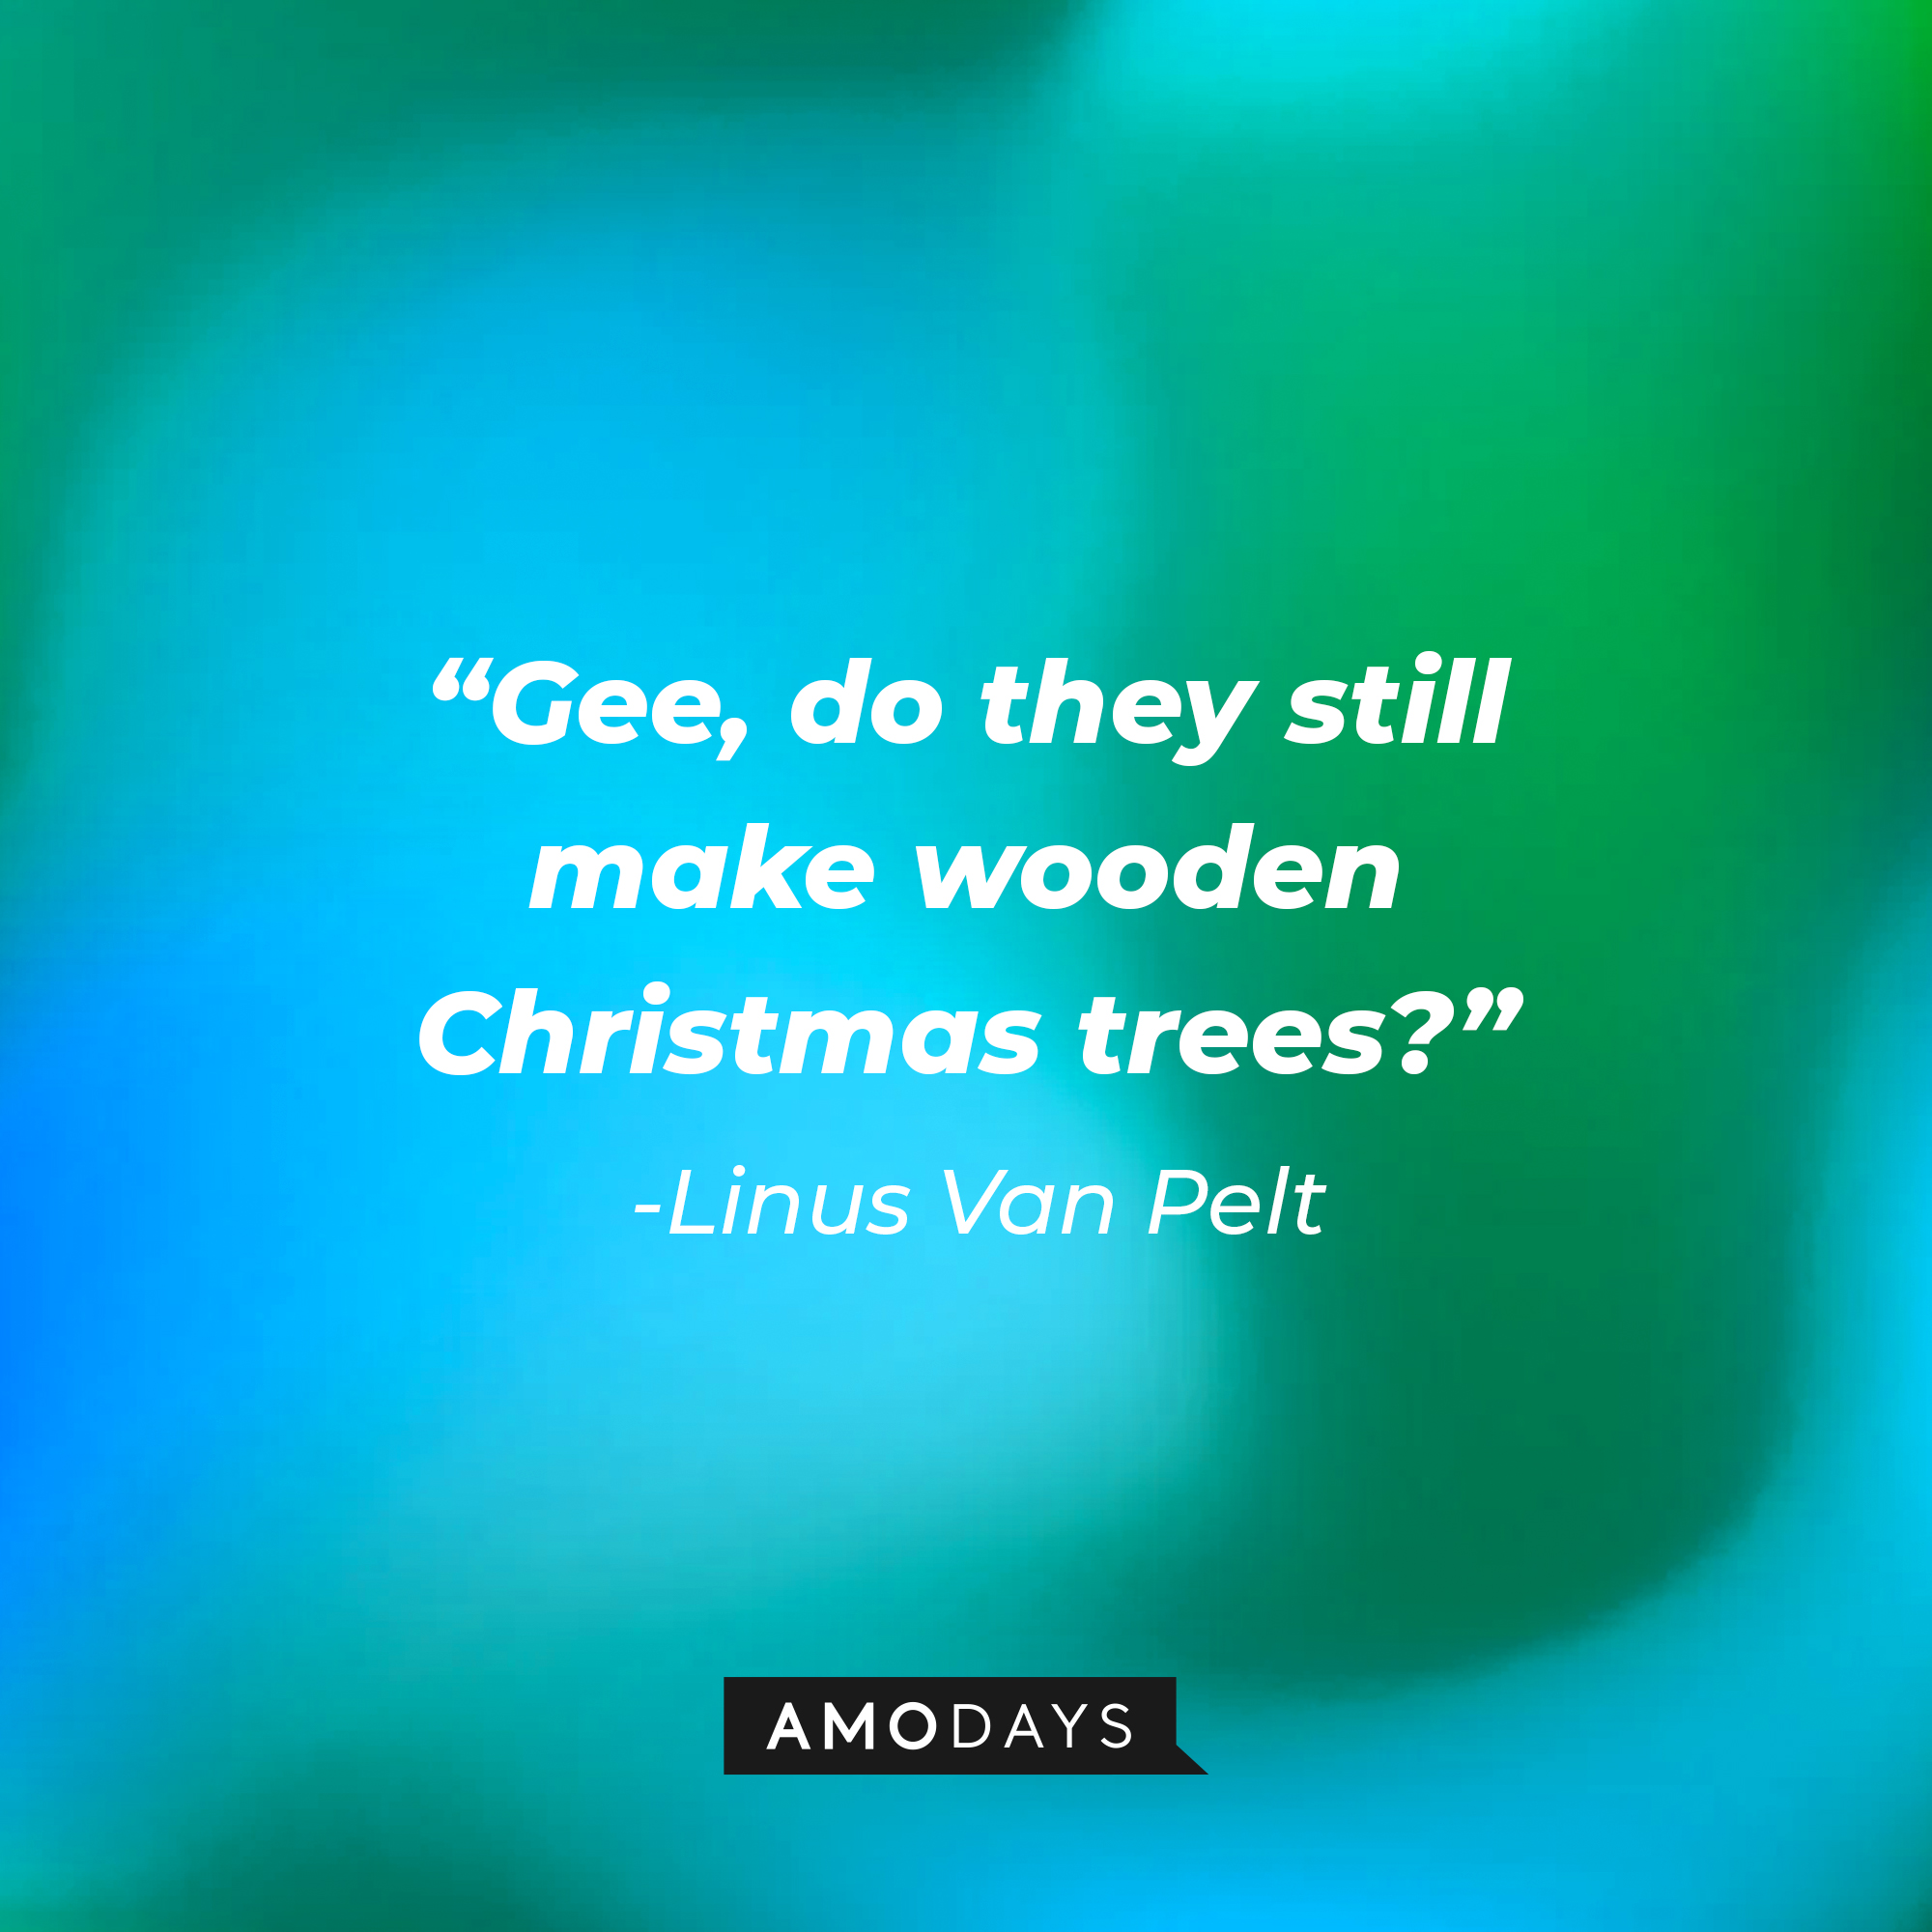 Linus Van Pelt's quote: "Gee, do they still make wooden Christmas trees?" | Source: Amodays